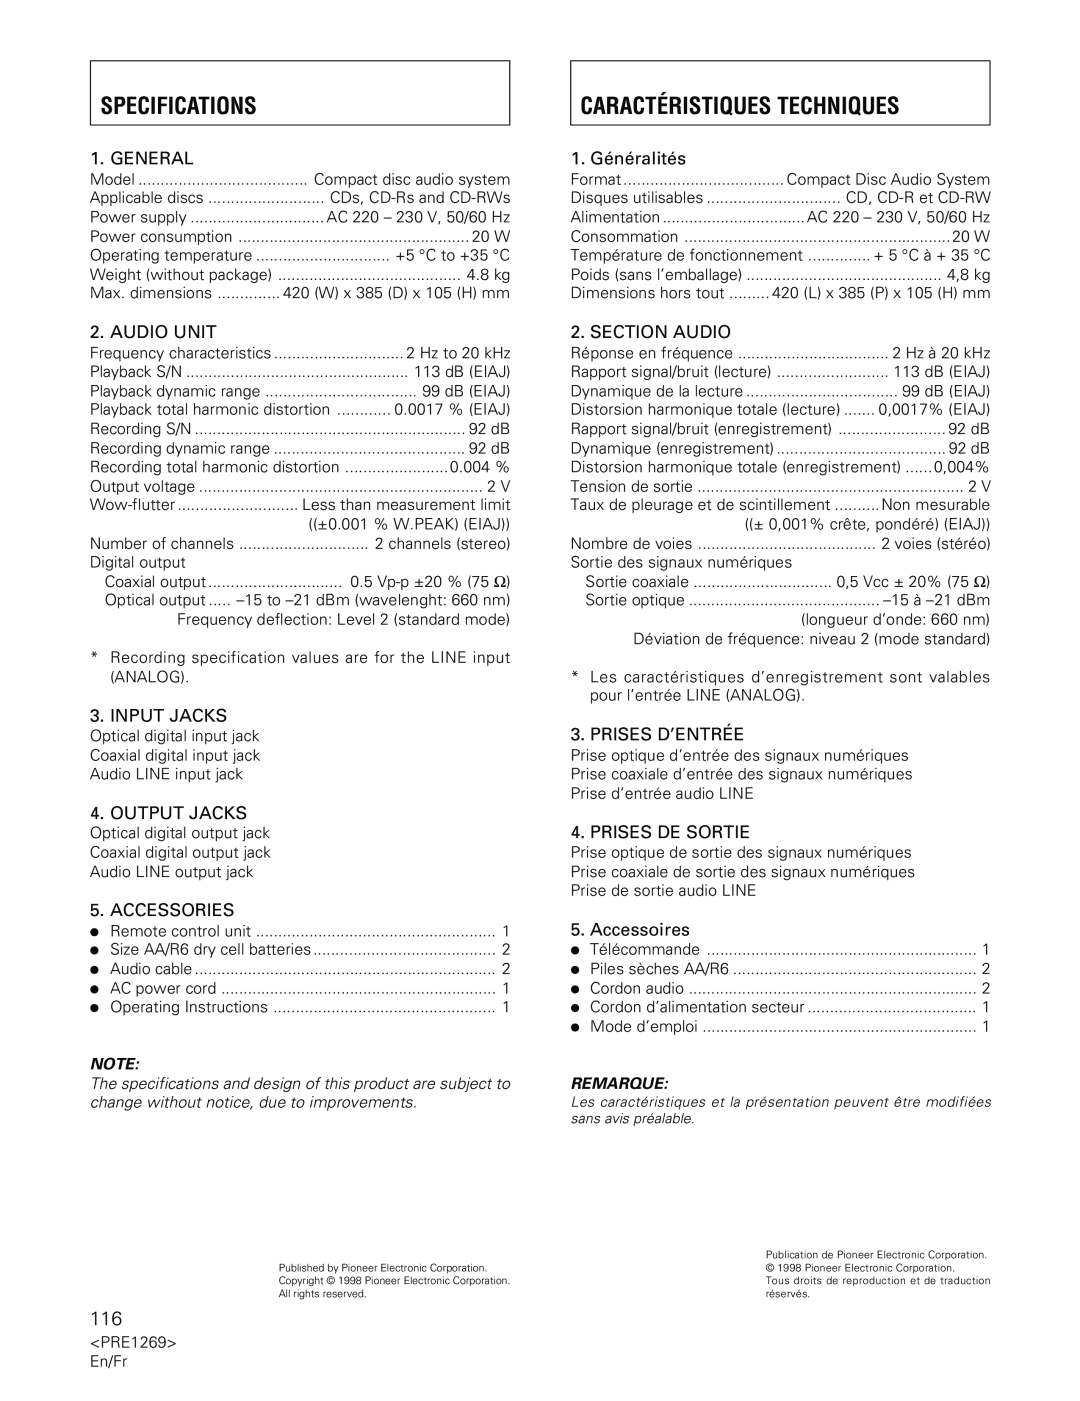 Pioneer PDR-555RW operating instructions Specifications, Caractéristiques Techniques 